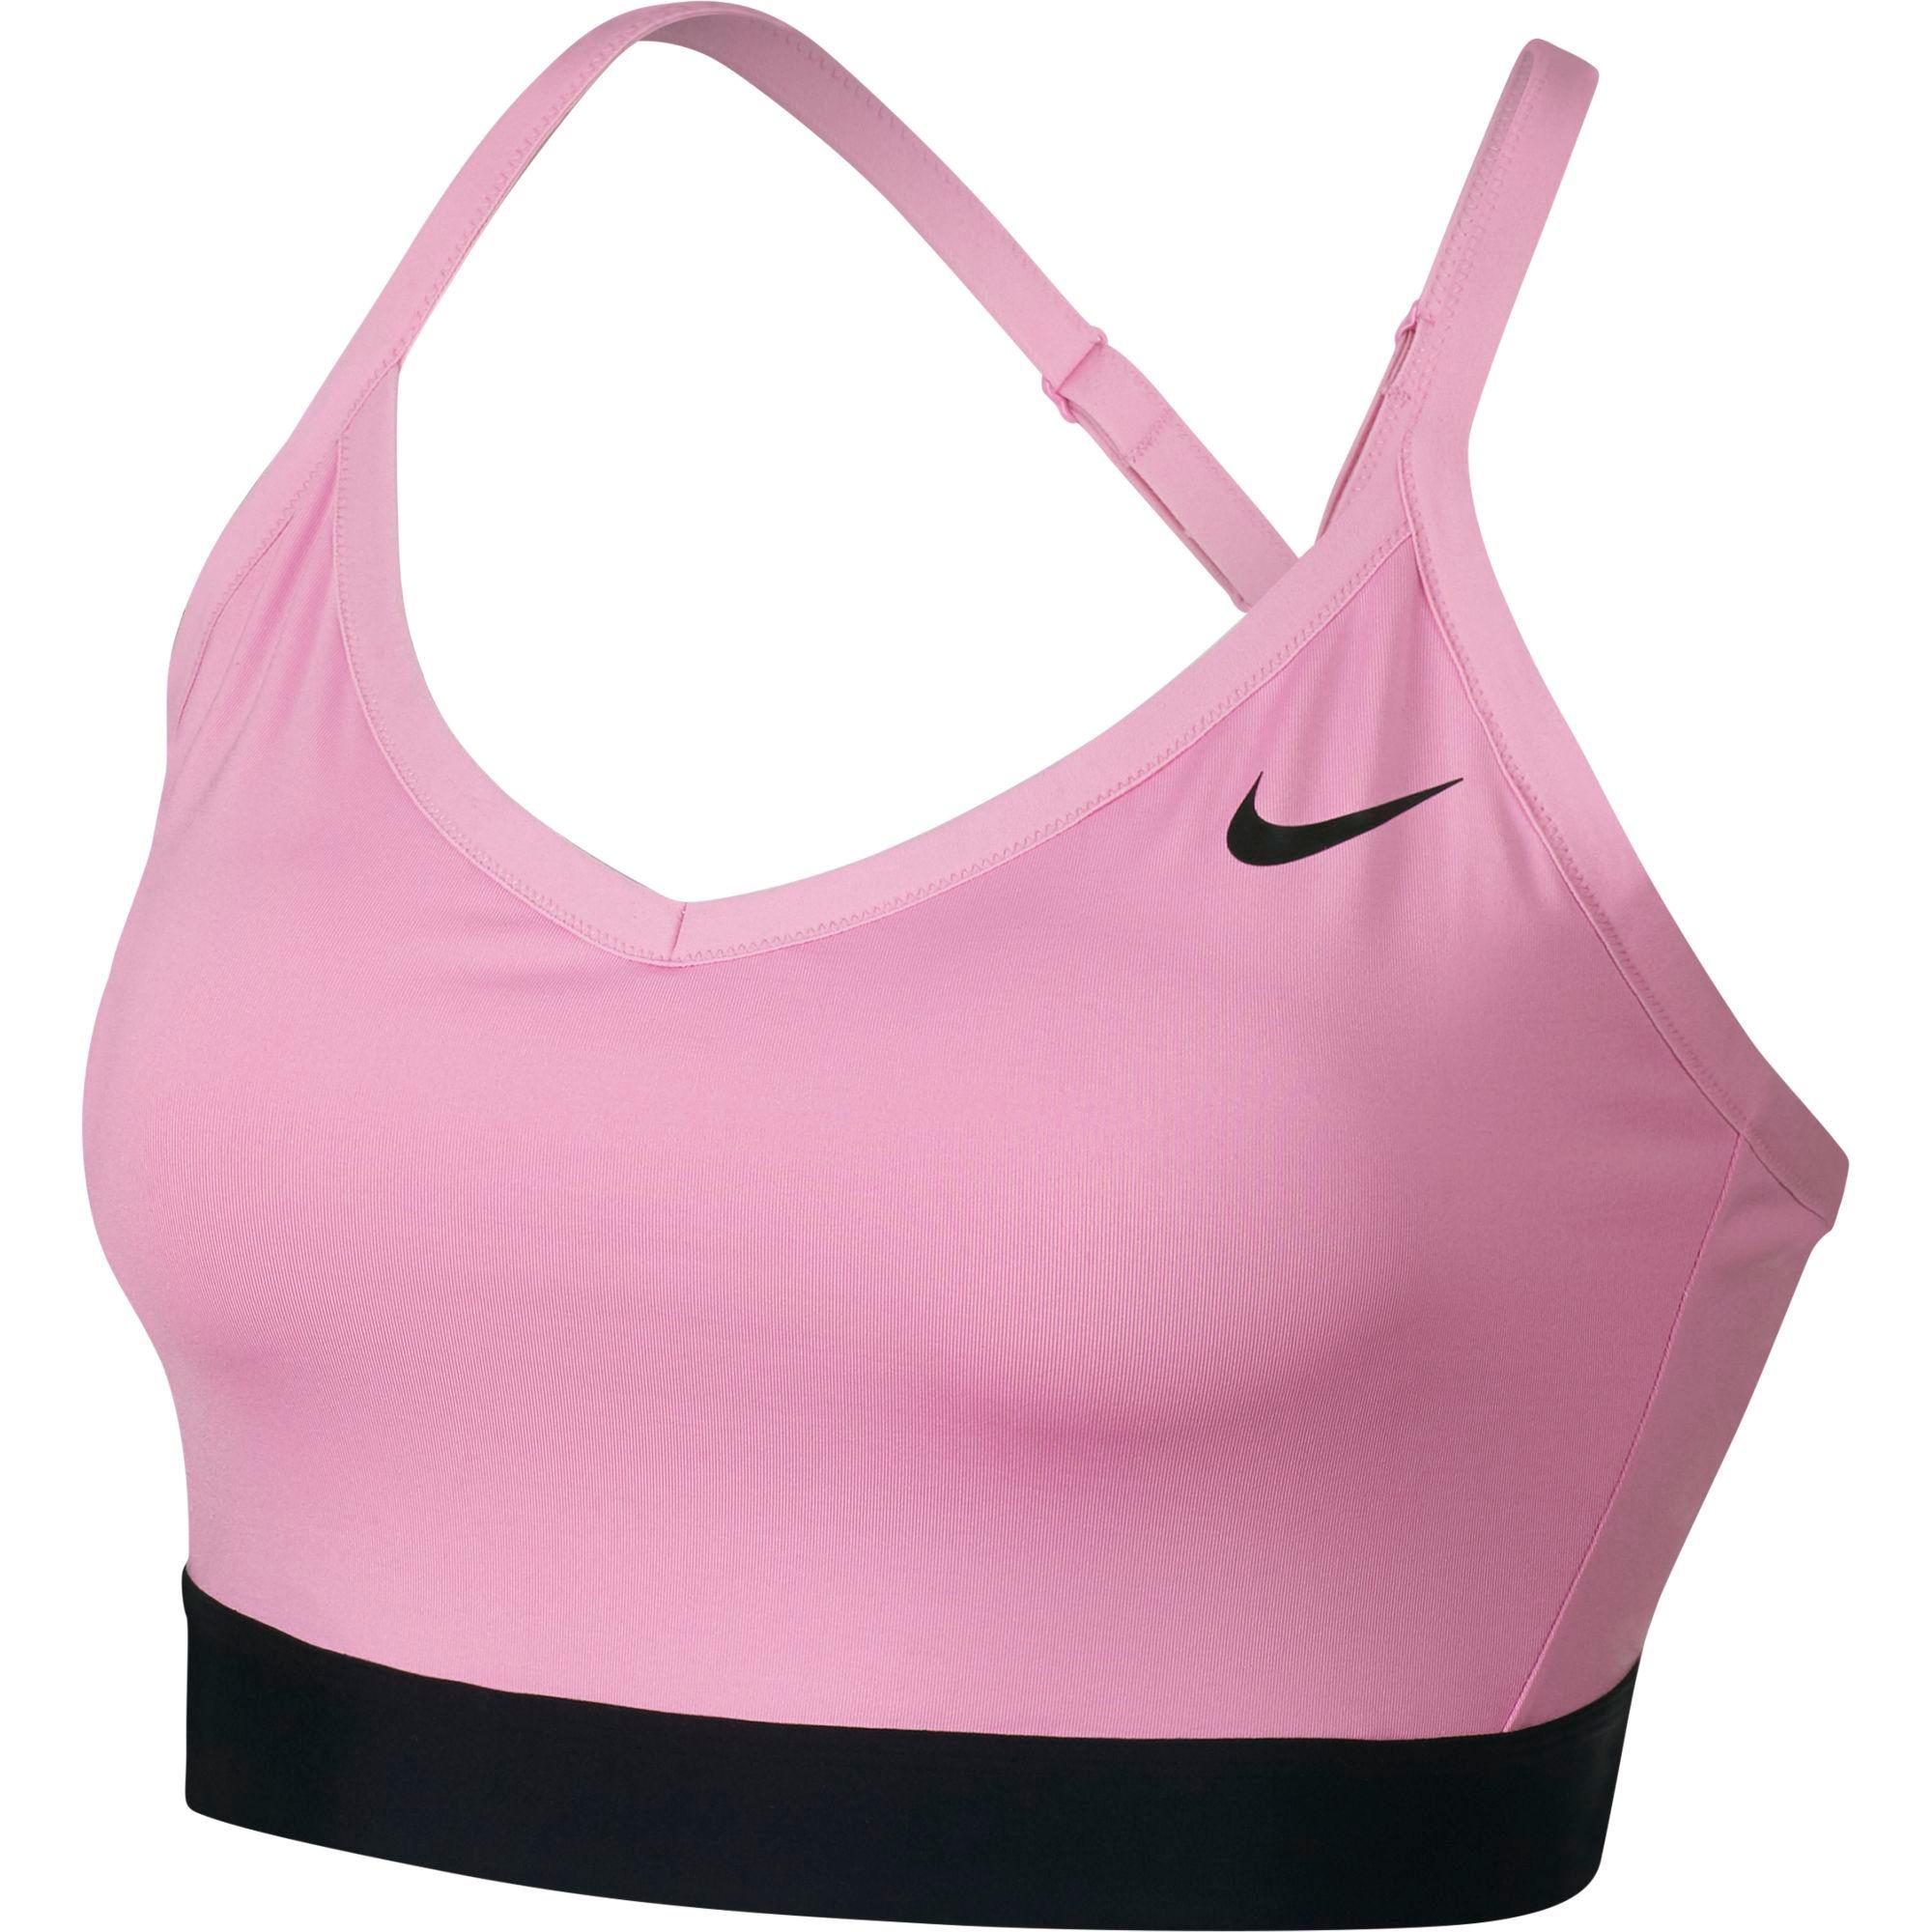 Nike Plus Size Indy Sports Bra in Pink - Lyst